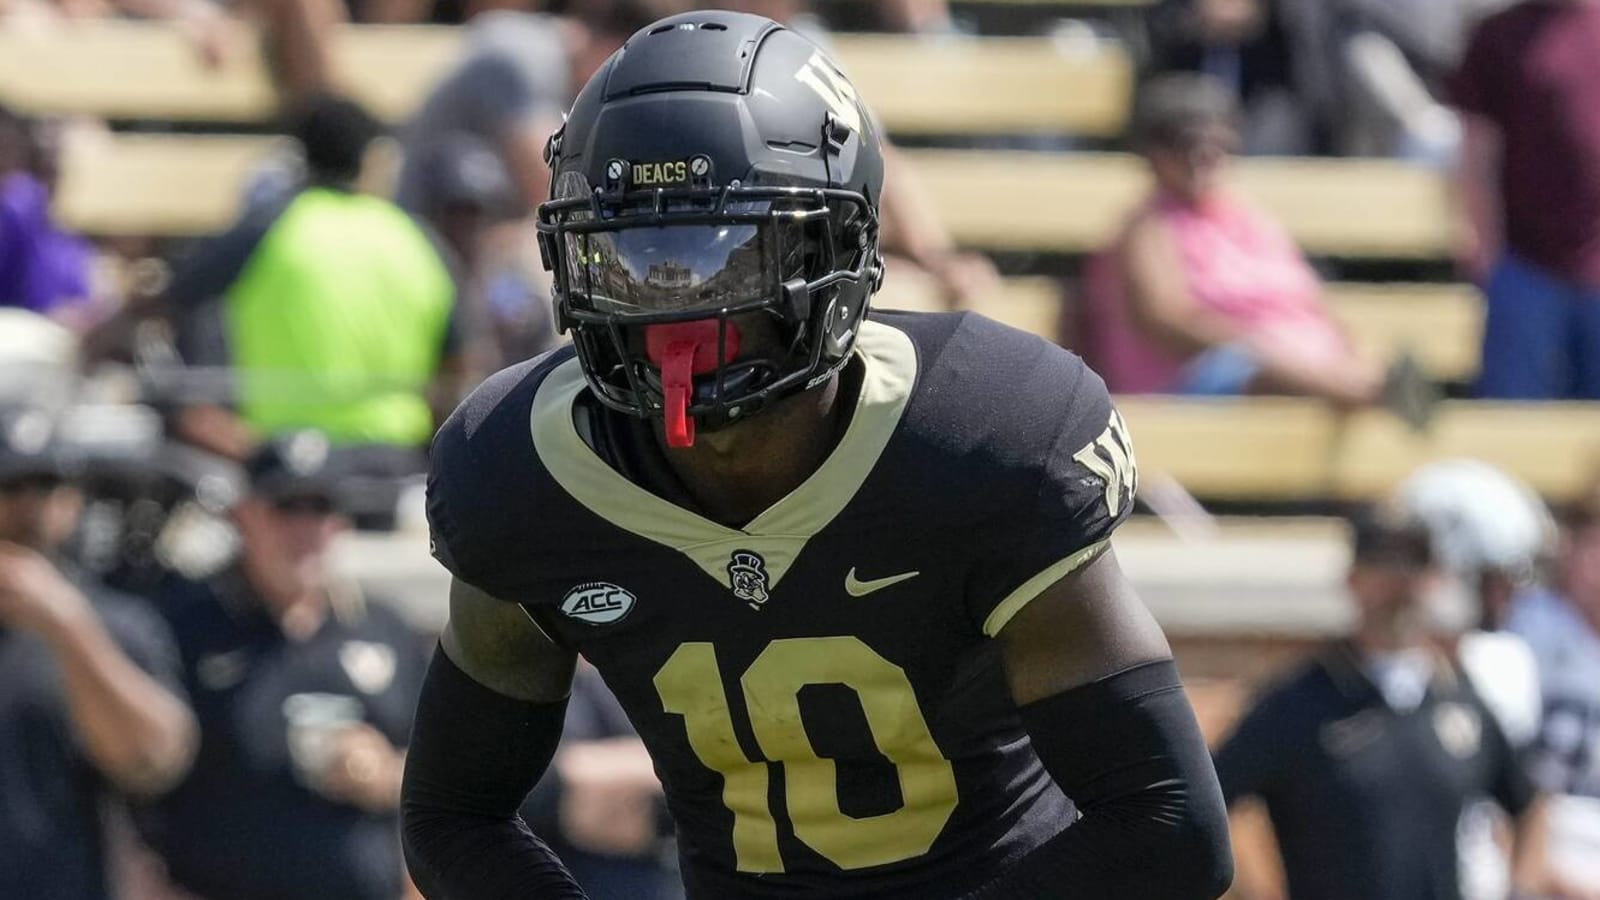 Alabama to host Wake Forest transfer DB this weekend